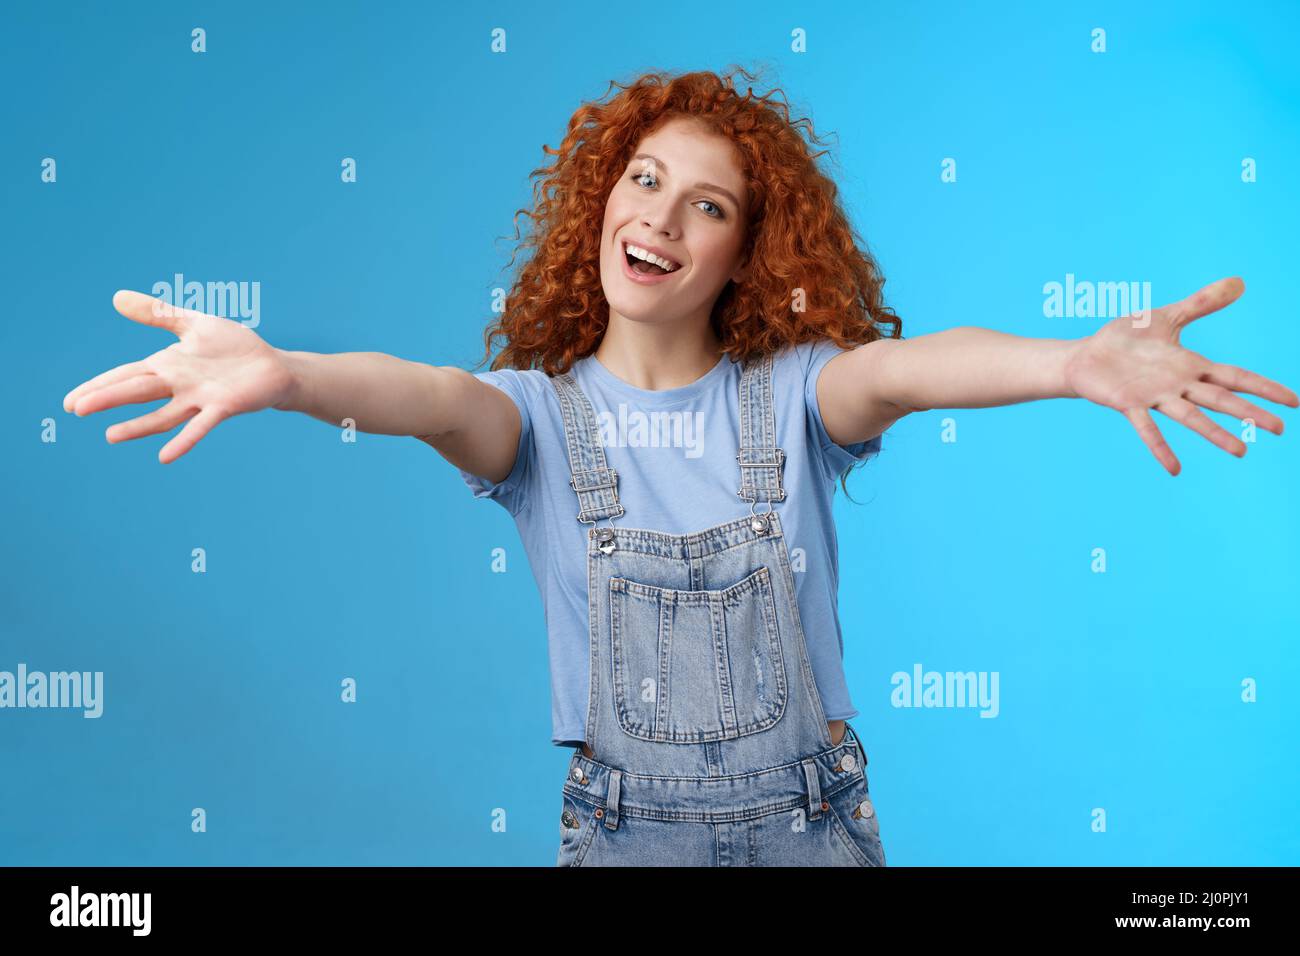 Friendly cheerful family-oriented stylish charming redhead curly-haired girl extend arms embraces wanna cuddle smiling tender ti Stock Photo